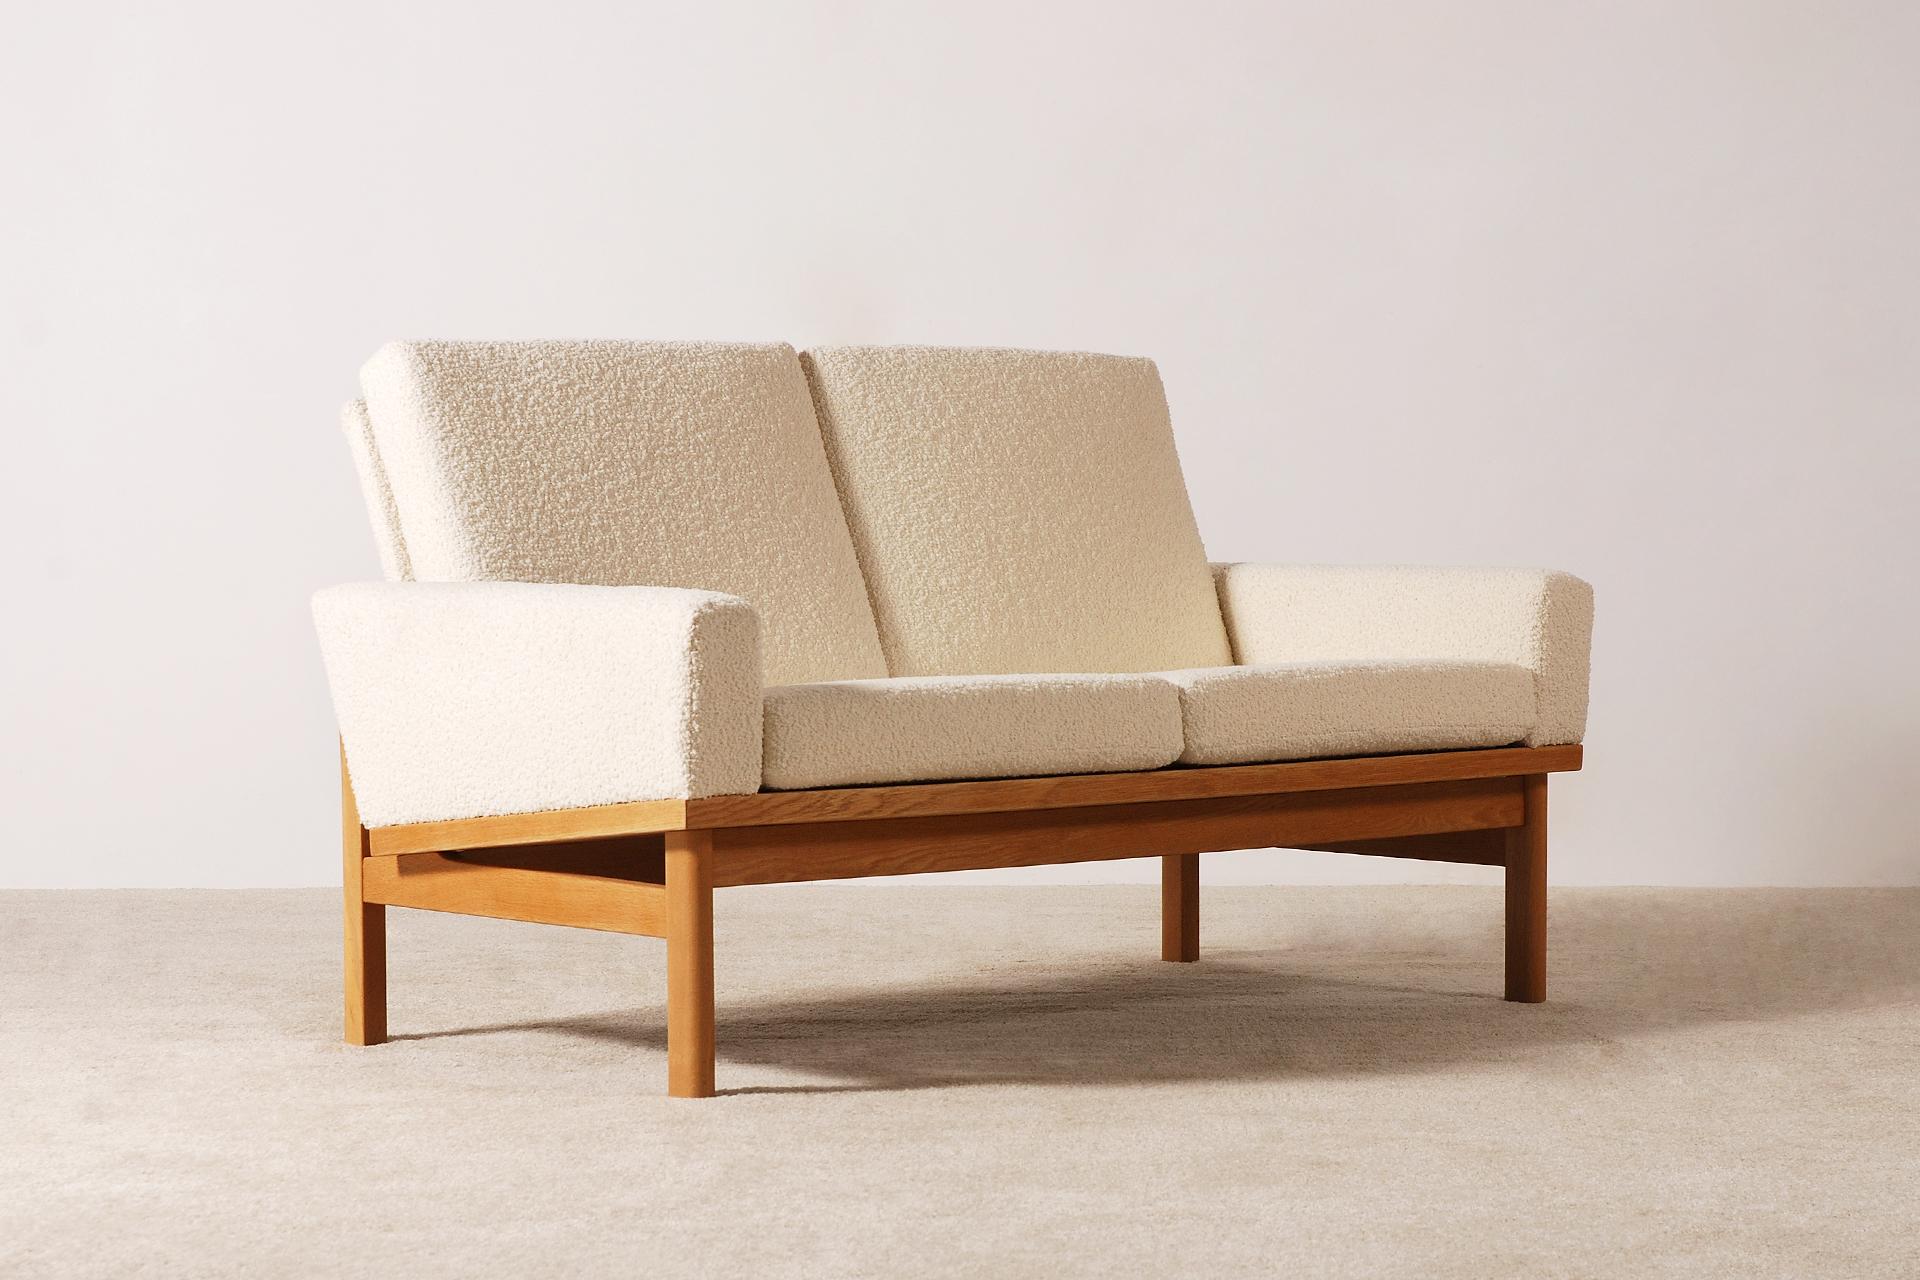 Nice oak frame and Bouclé fabric sofa by the Danish designer Poul Volther,
Denmark, circa 1960s.

This sofa have been fully restored and newly upholstered with a high quality wool 